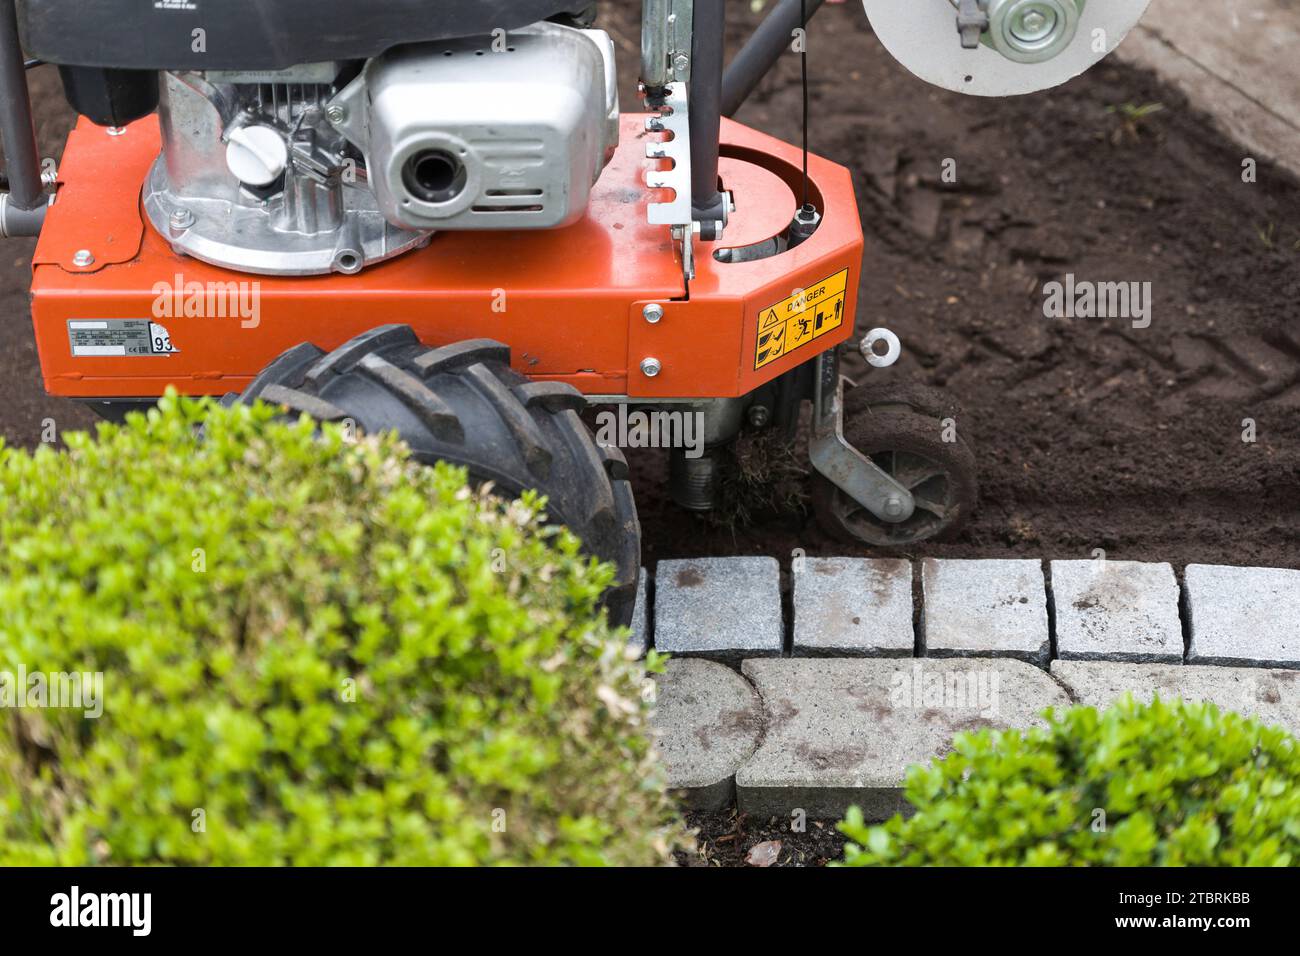 Cable laying machine for robotic lawnmowers Stock Photo